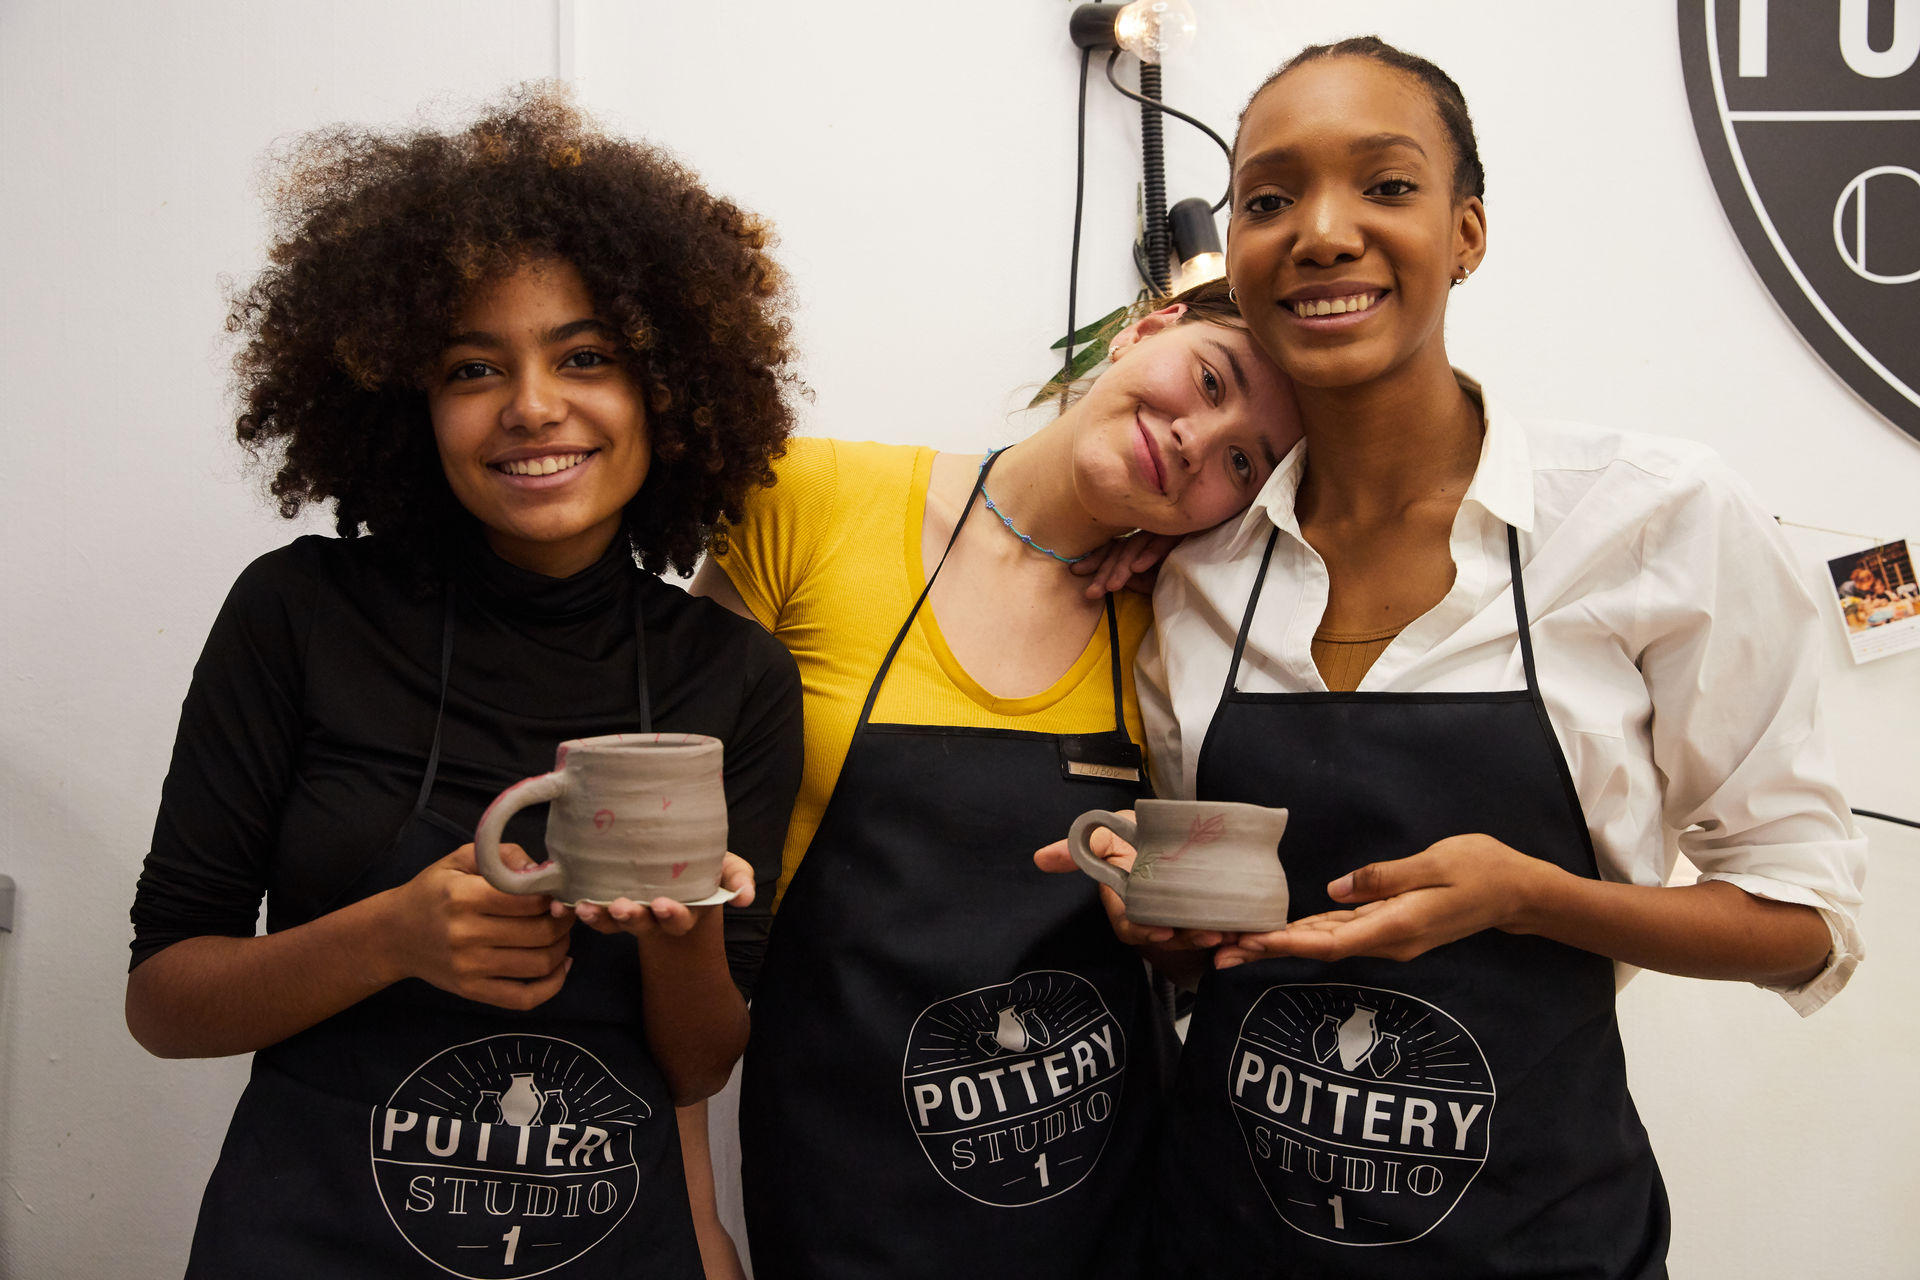 Pottery-Making BYOB Party Palooza with Booze: Sip & Spin with Your Besties image 1